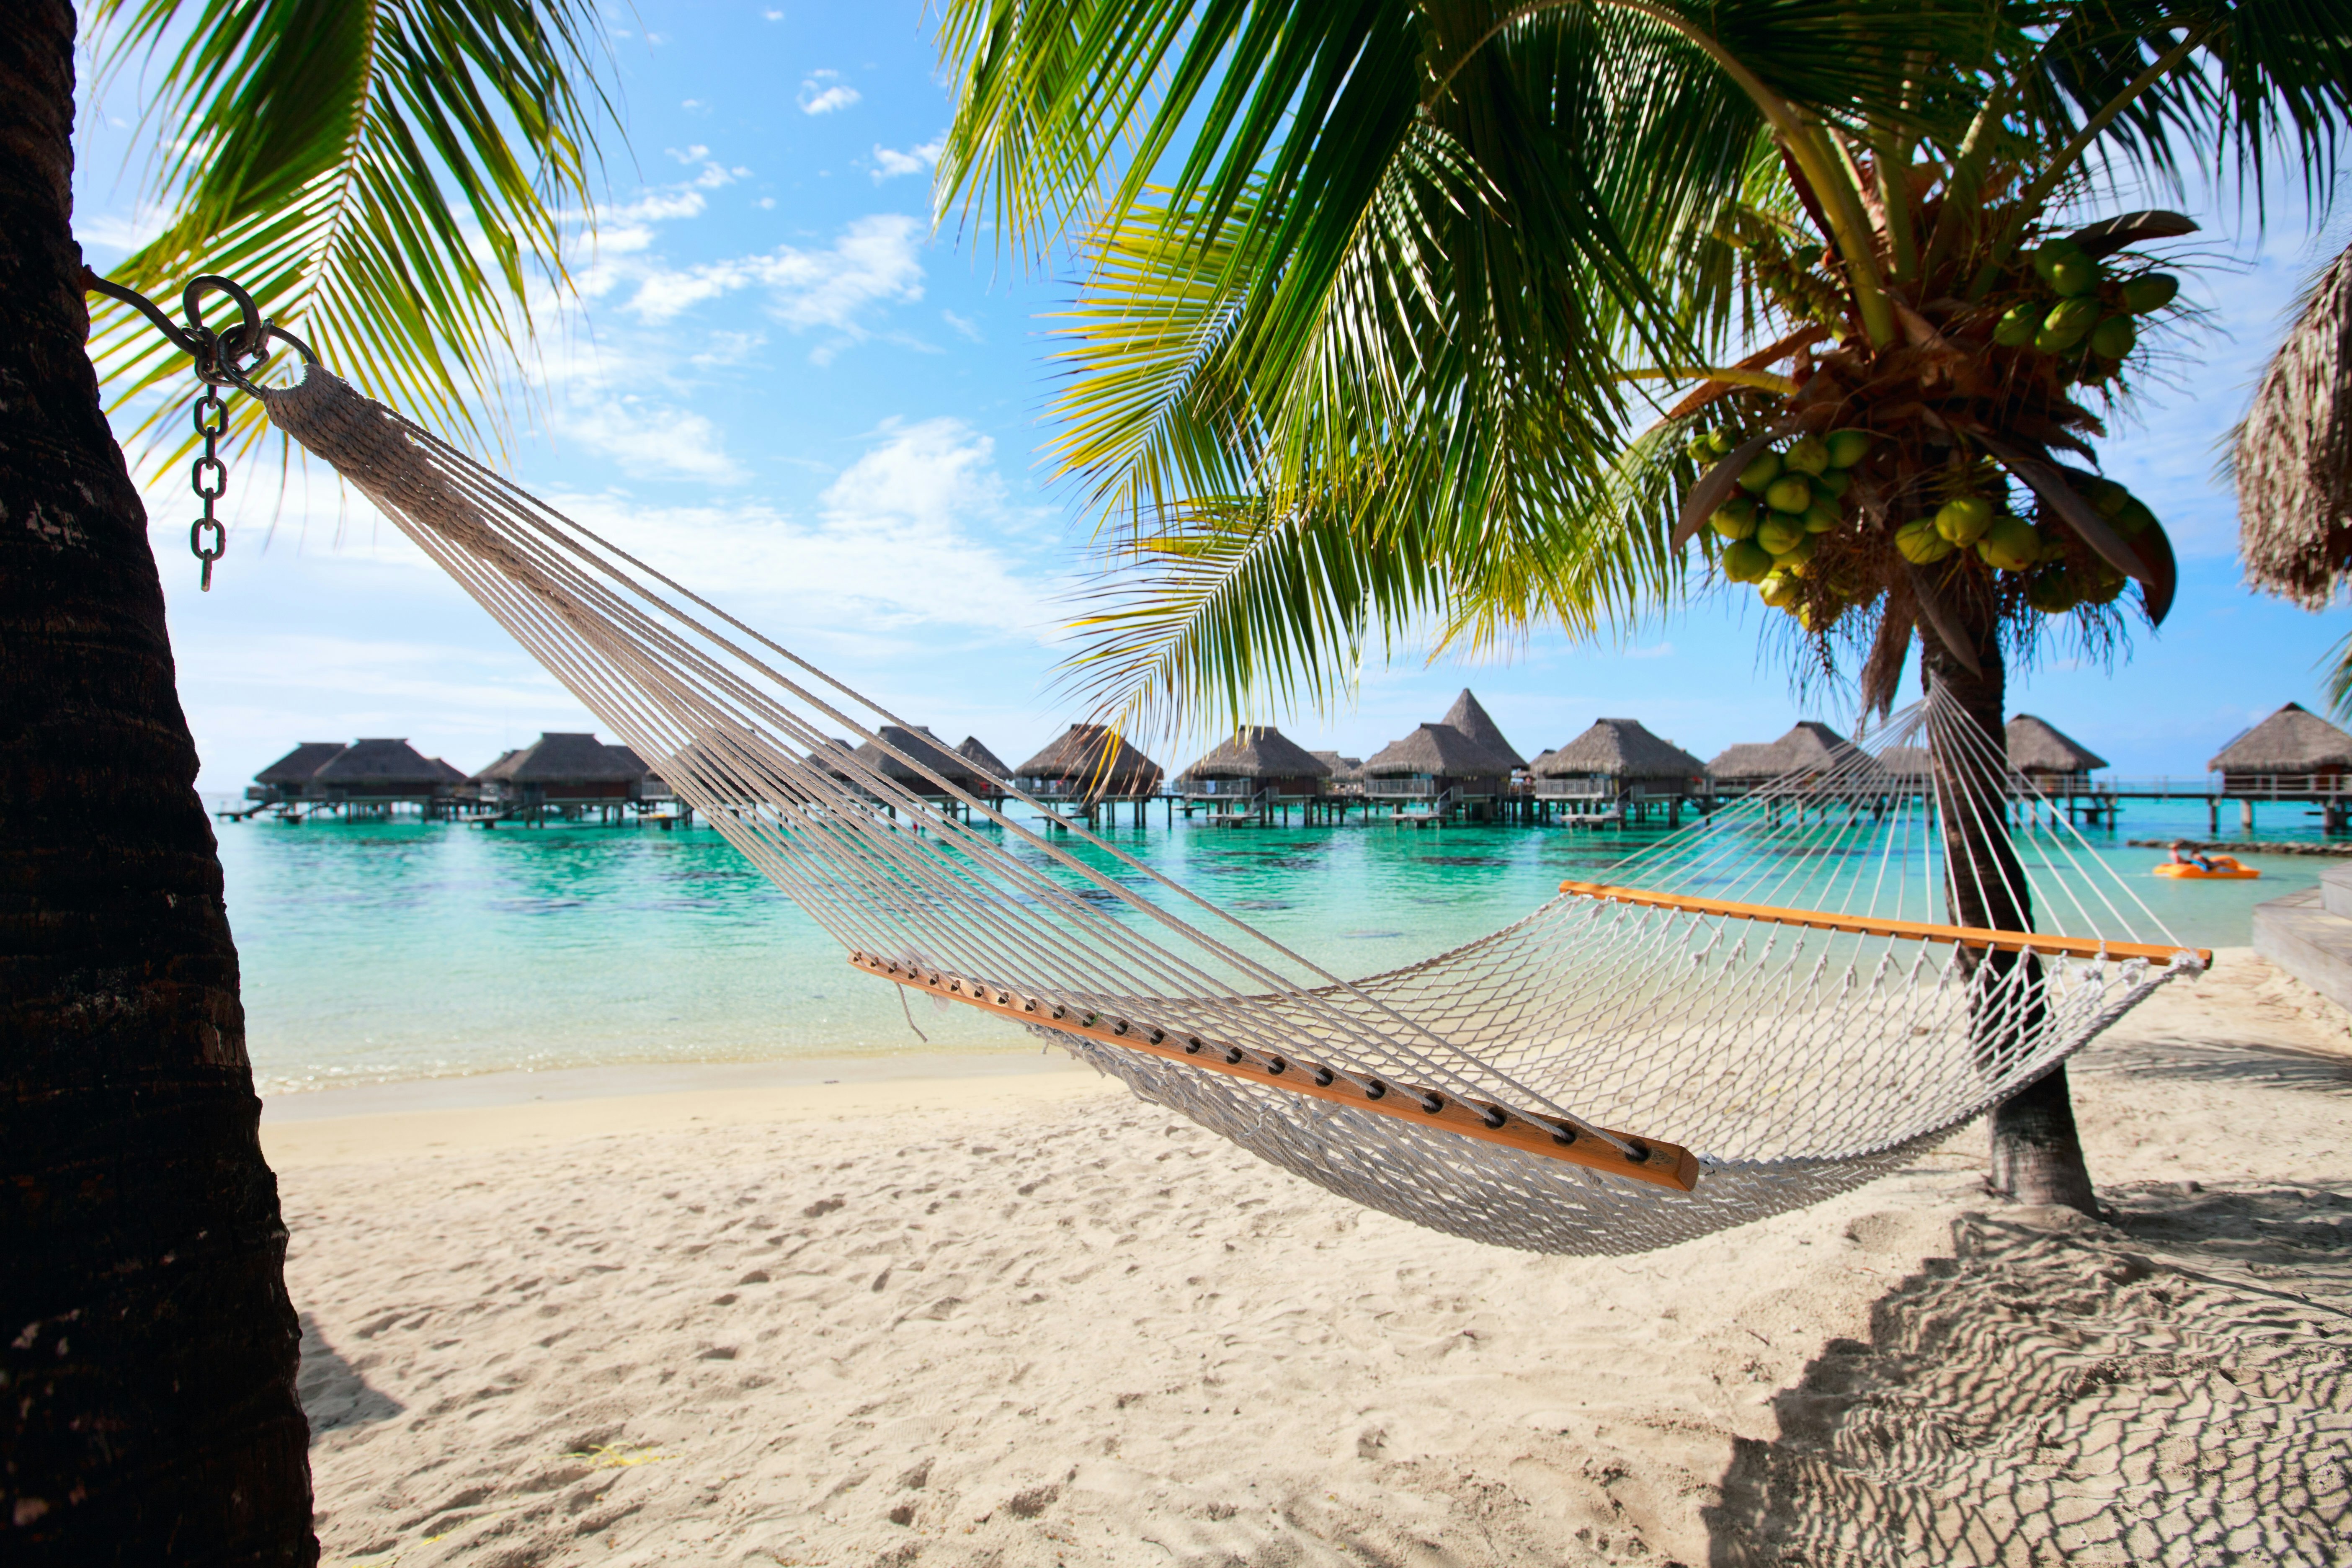 A hammock hangs between two coconut trees on a beach in Mo'orea.